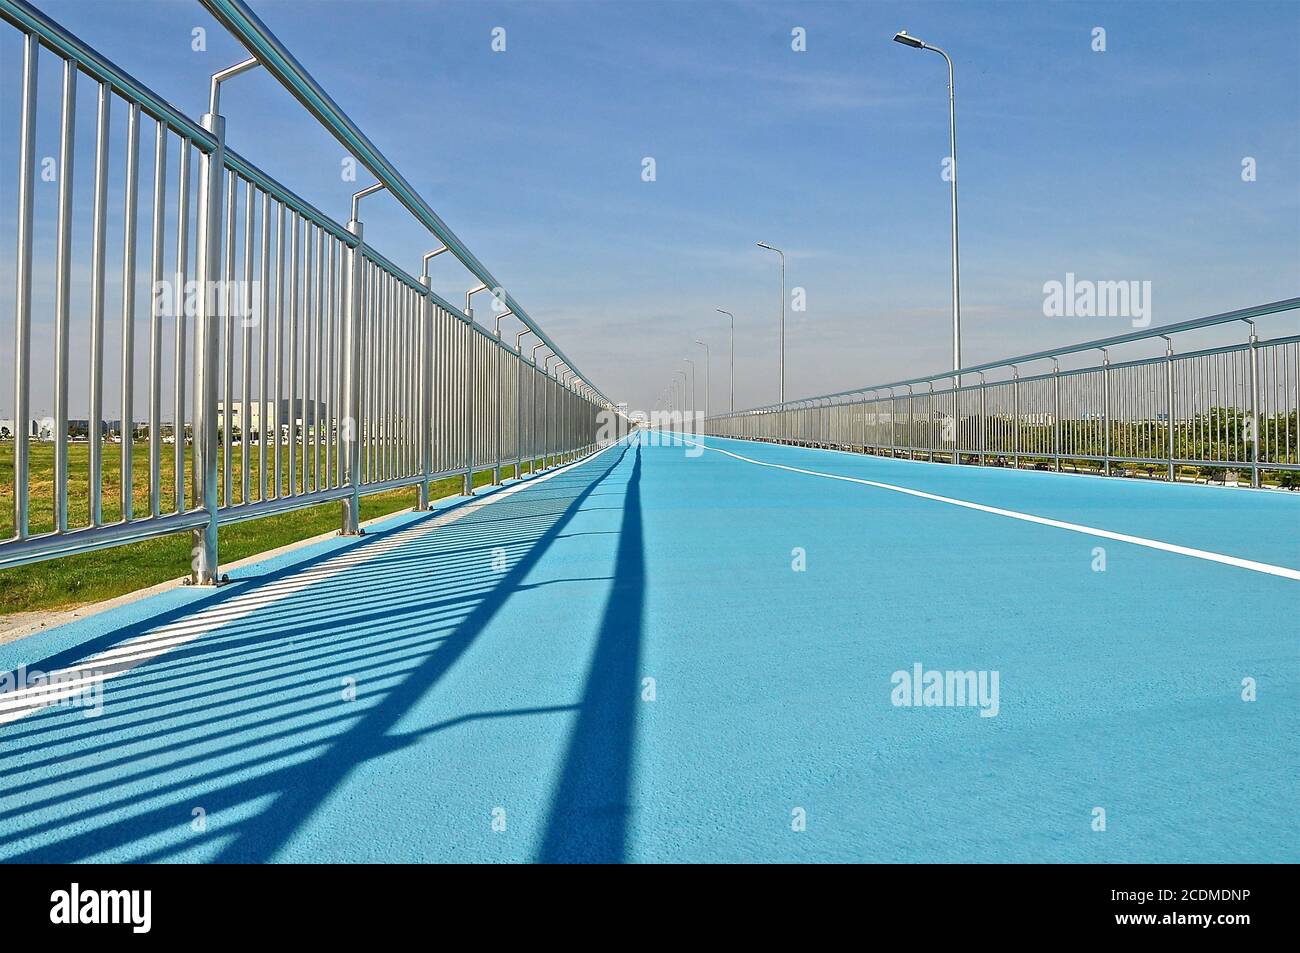 Perspective view of a blue cycle track with stainless steel fencing and a blue sky background, lines showing the vanishing point. Stock Photo